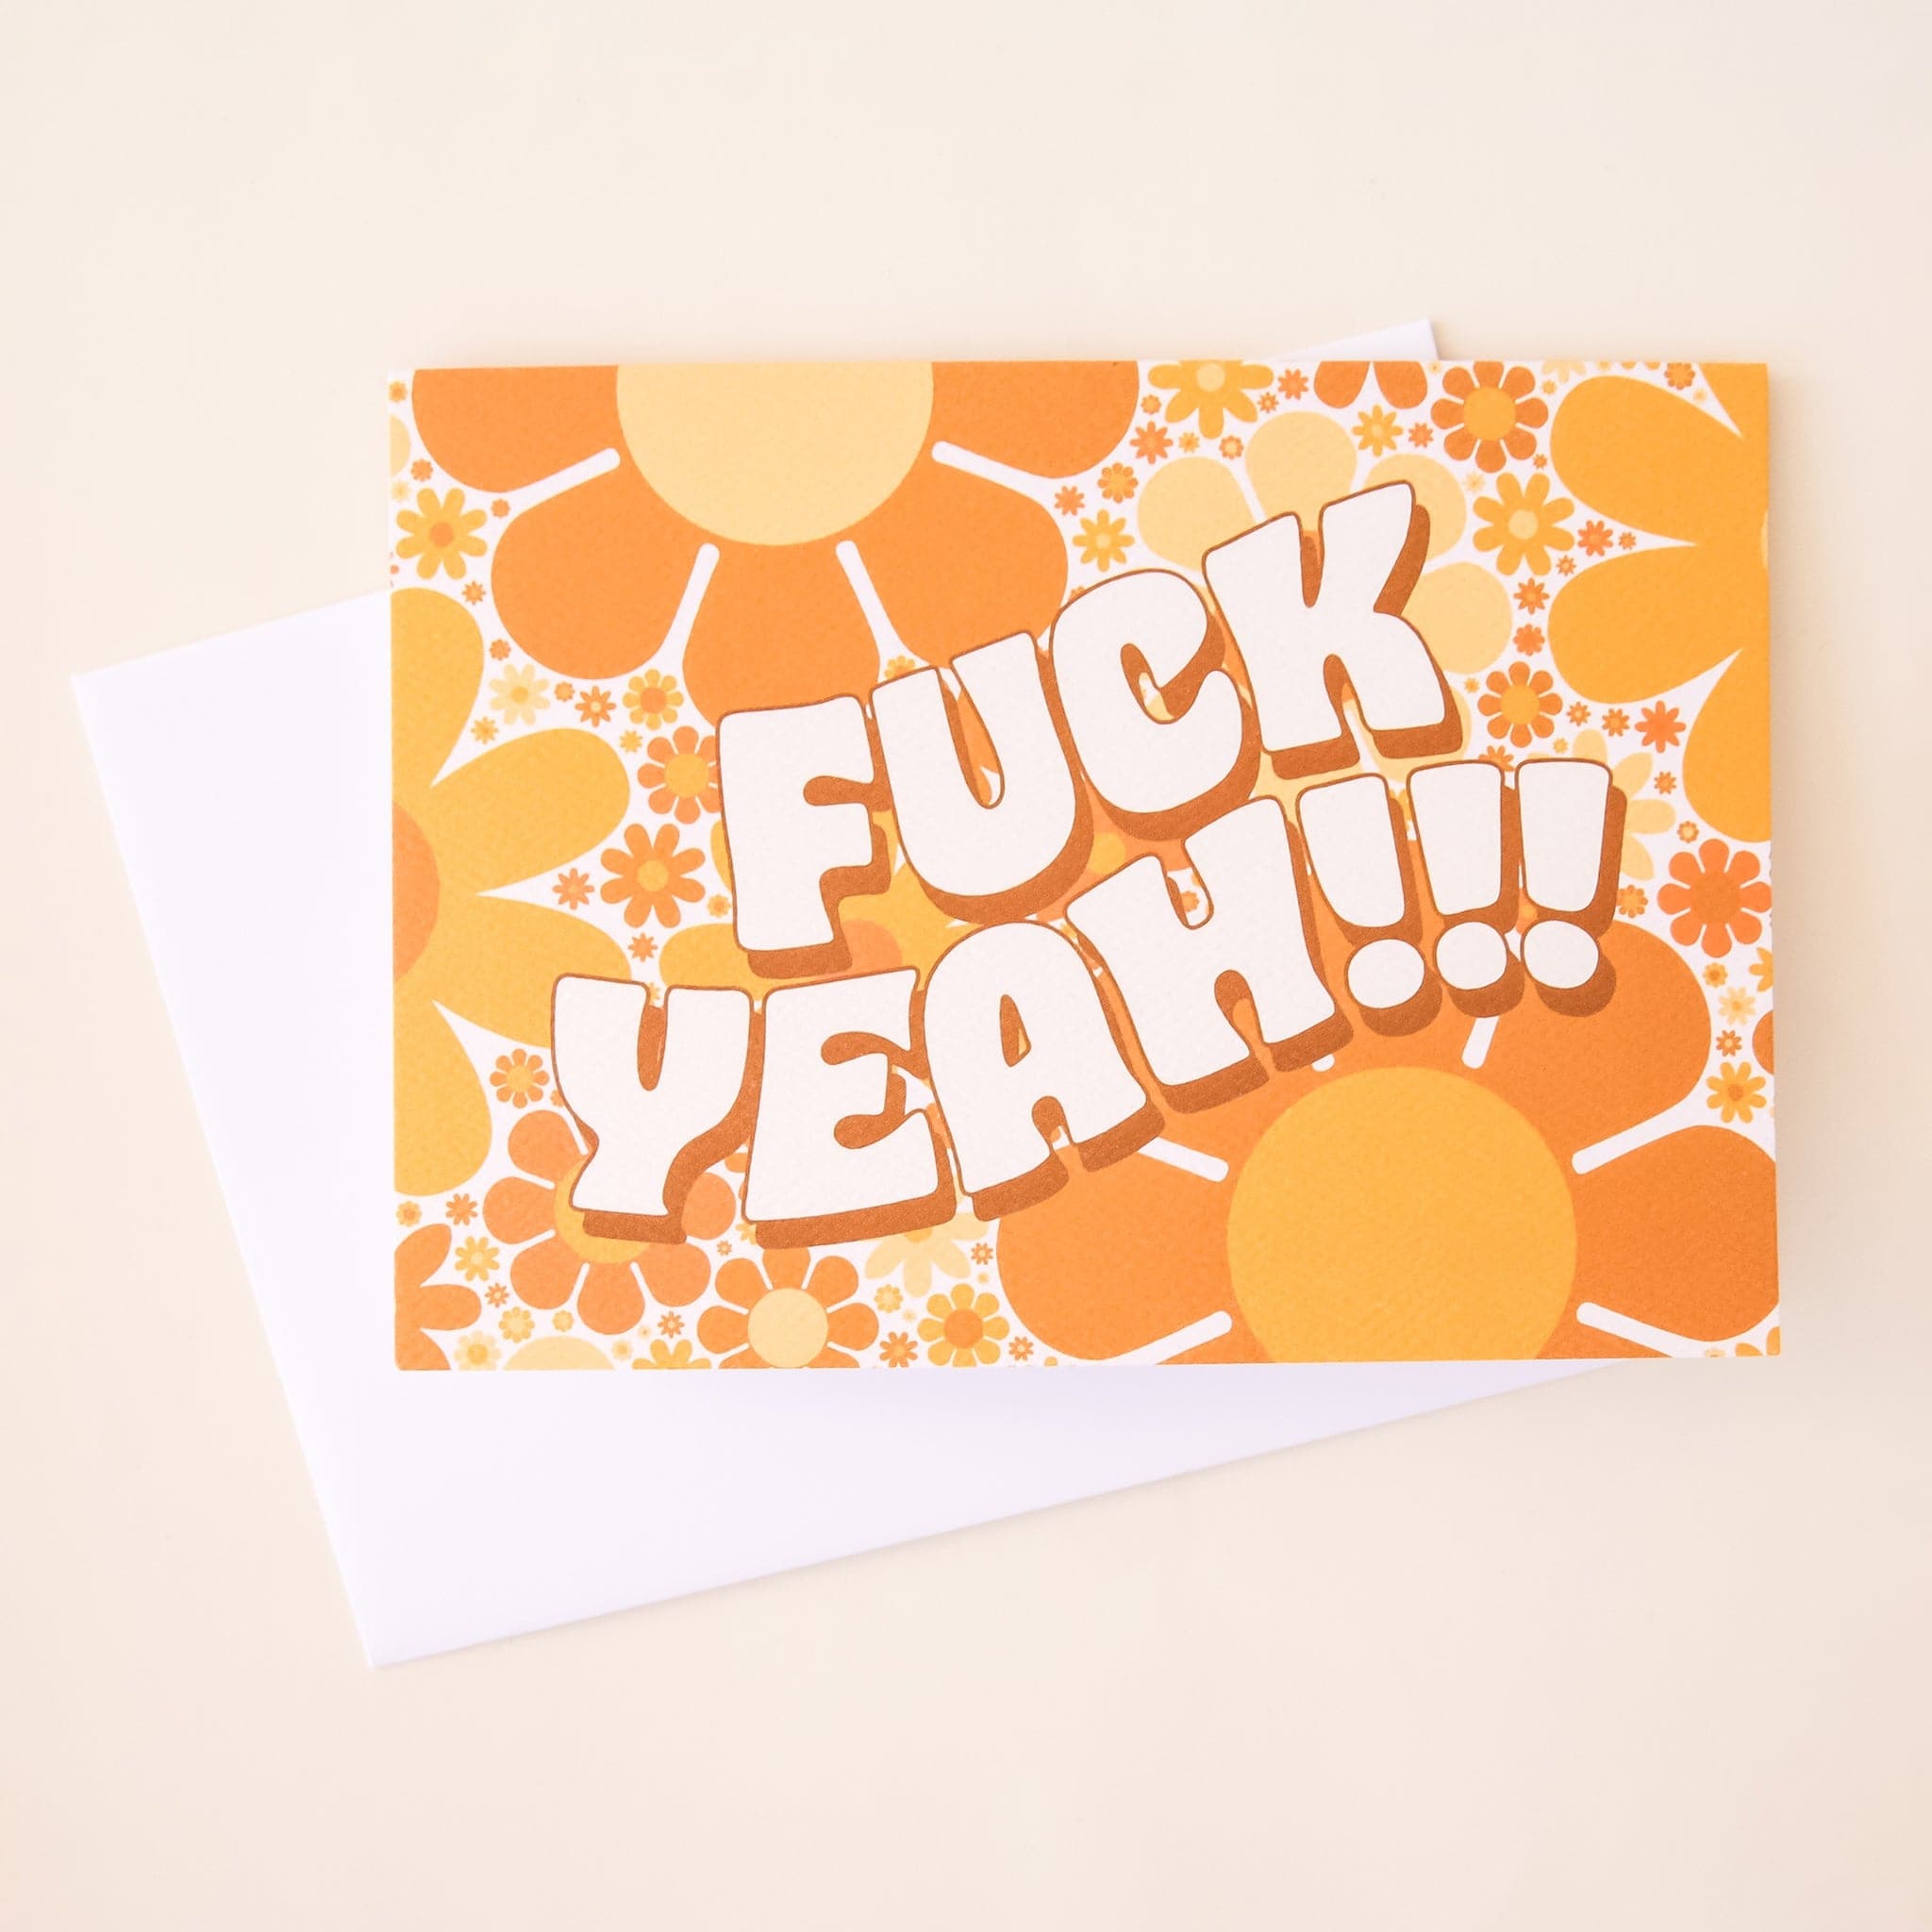 Greeting card filled with retro yellow and orange flowers. The card reads &#39;fuck yeah!!!&#39; in curved white bubble lettering. The card is accompanied by a solid white envelope.